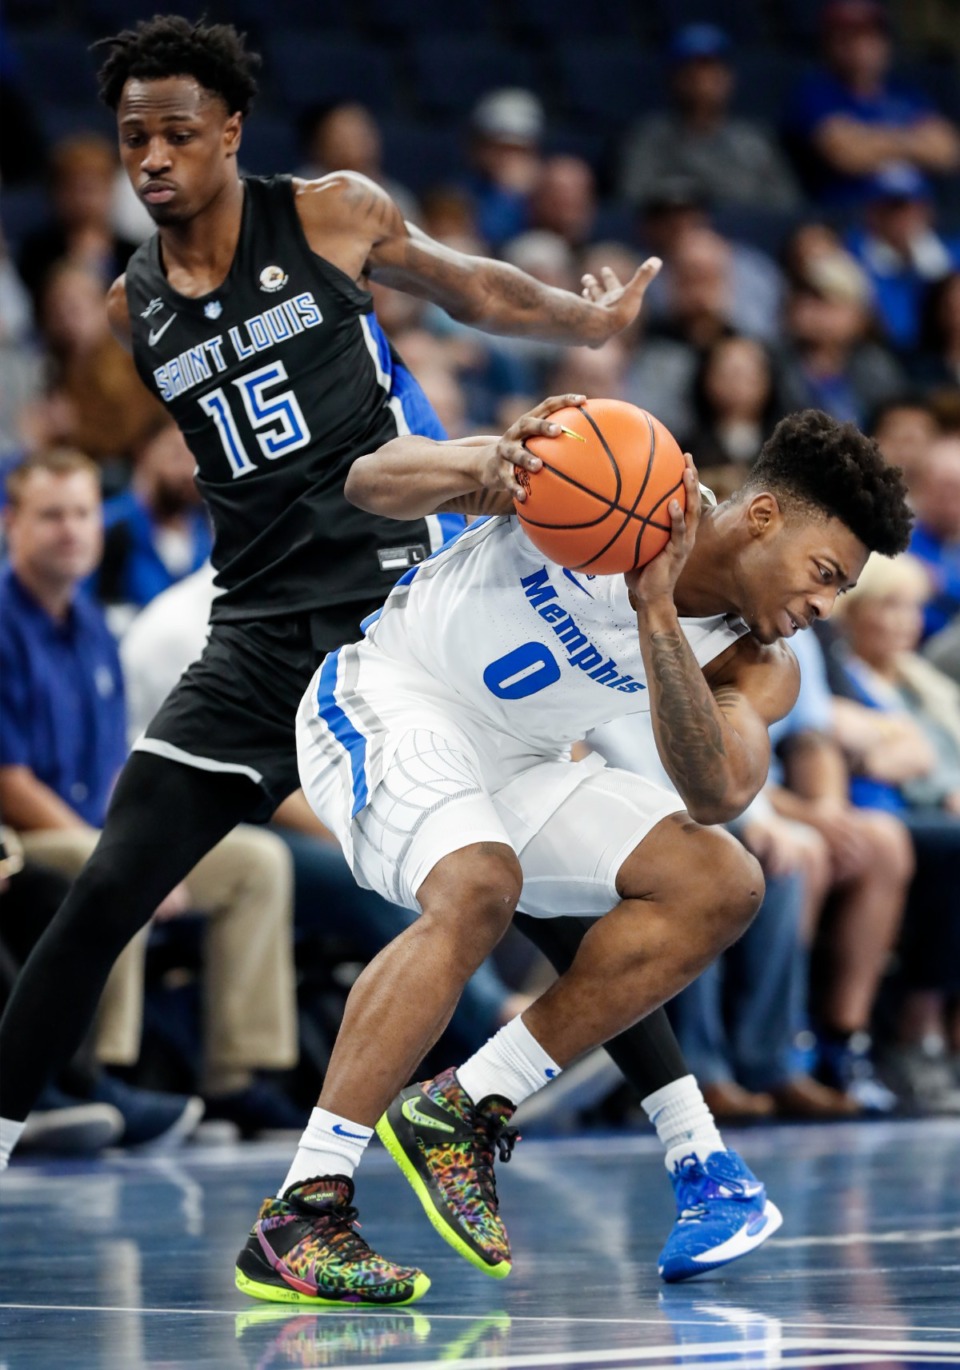 <strong>Memphis guard Earl Timberlake loses his footing while being guarded by Saint Louis defender Jordan Nesbitt during action on Tuesday, Nov. 16.</strong> (Mark Weber/Daily Memphian)